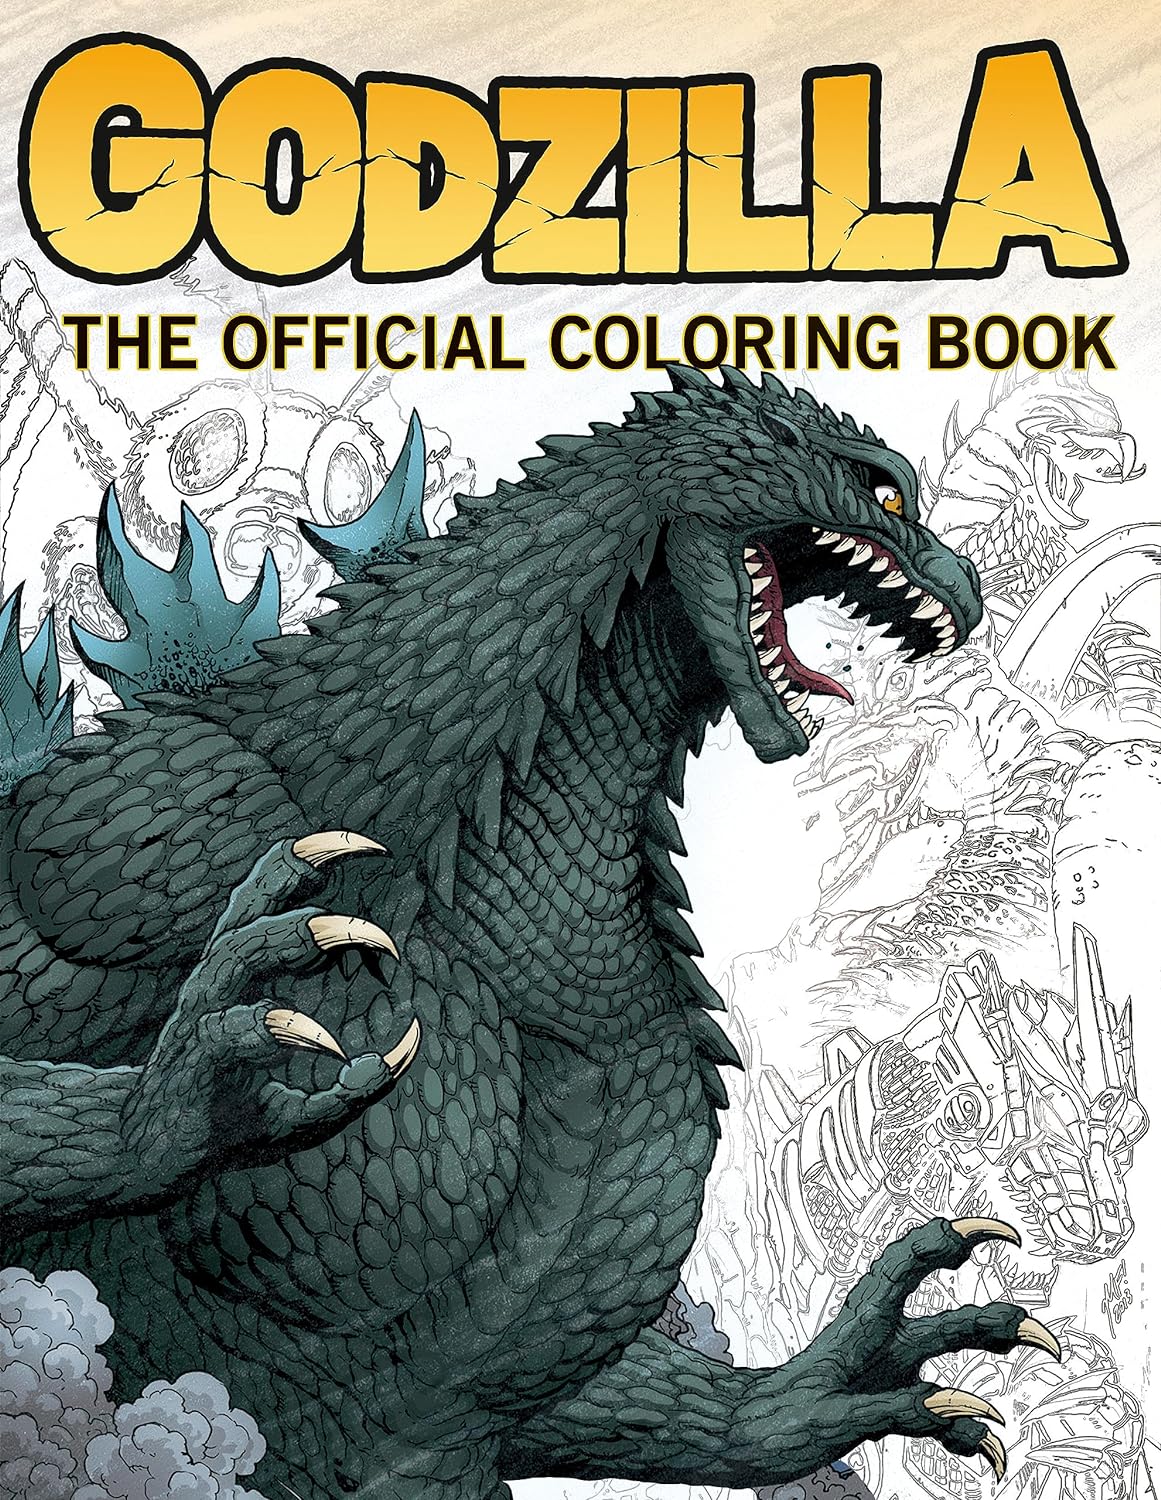 GODZILLA: THE OFFICIAL COLORING BOOK Coming From Titan Books